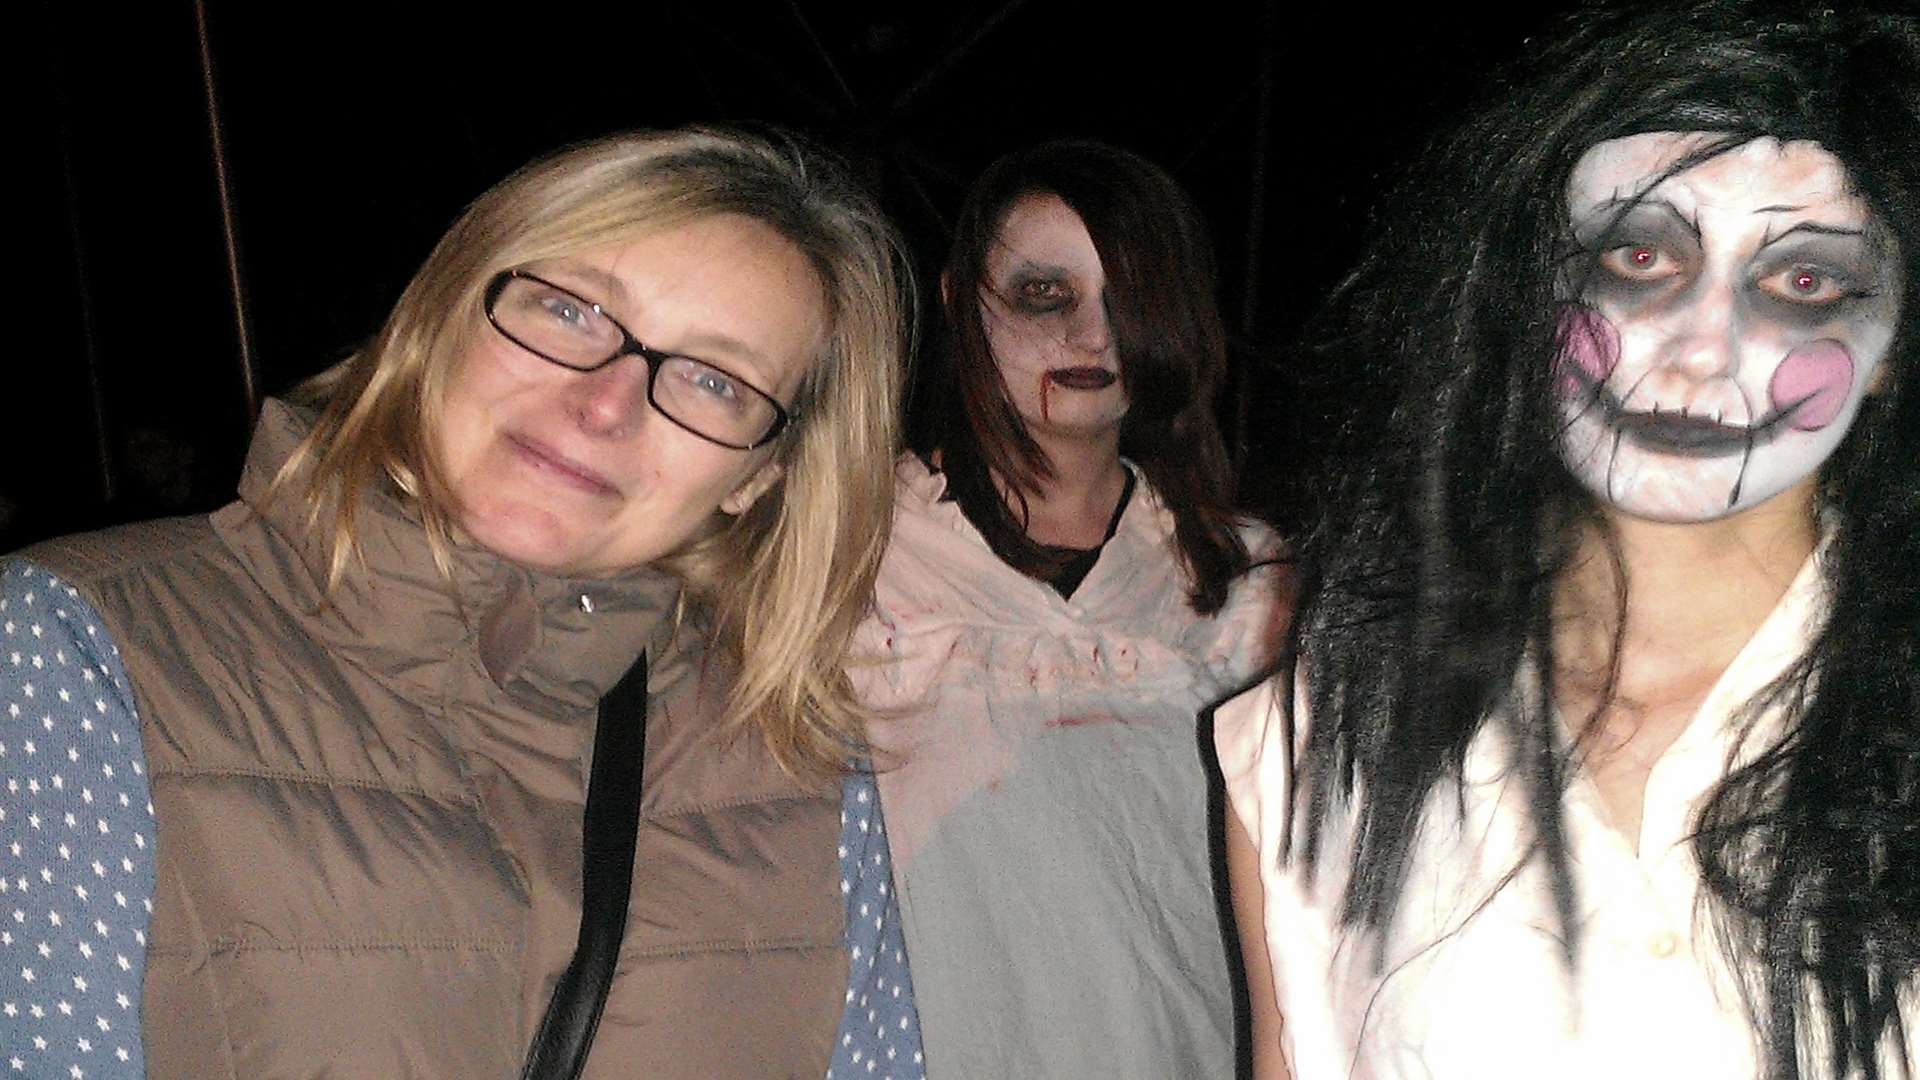 Reviewer Wendy Atkins (left) meets some of the Freak Week Resurrection ghouls